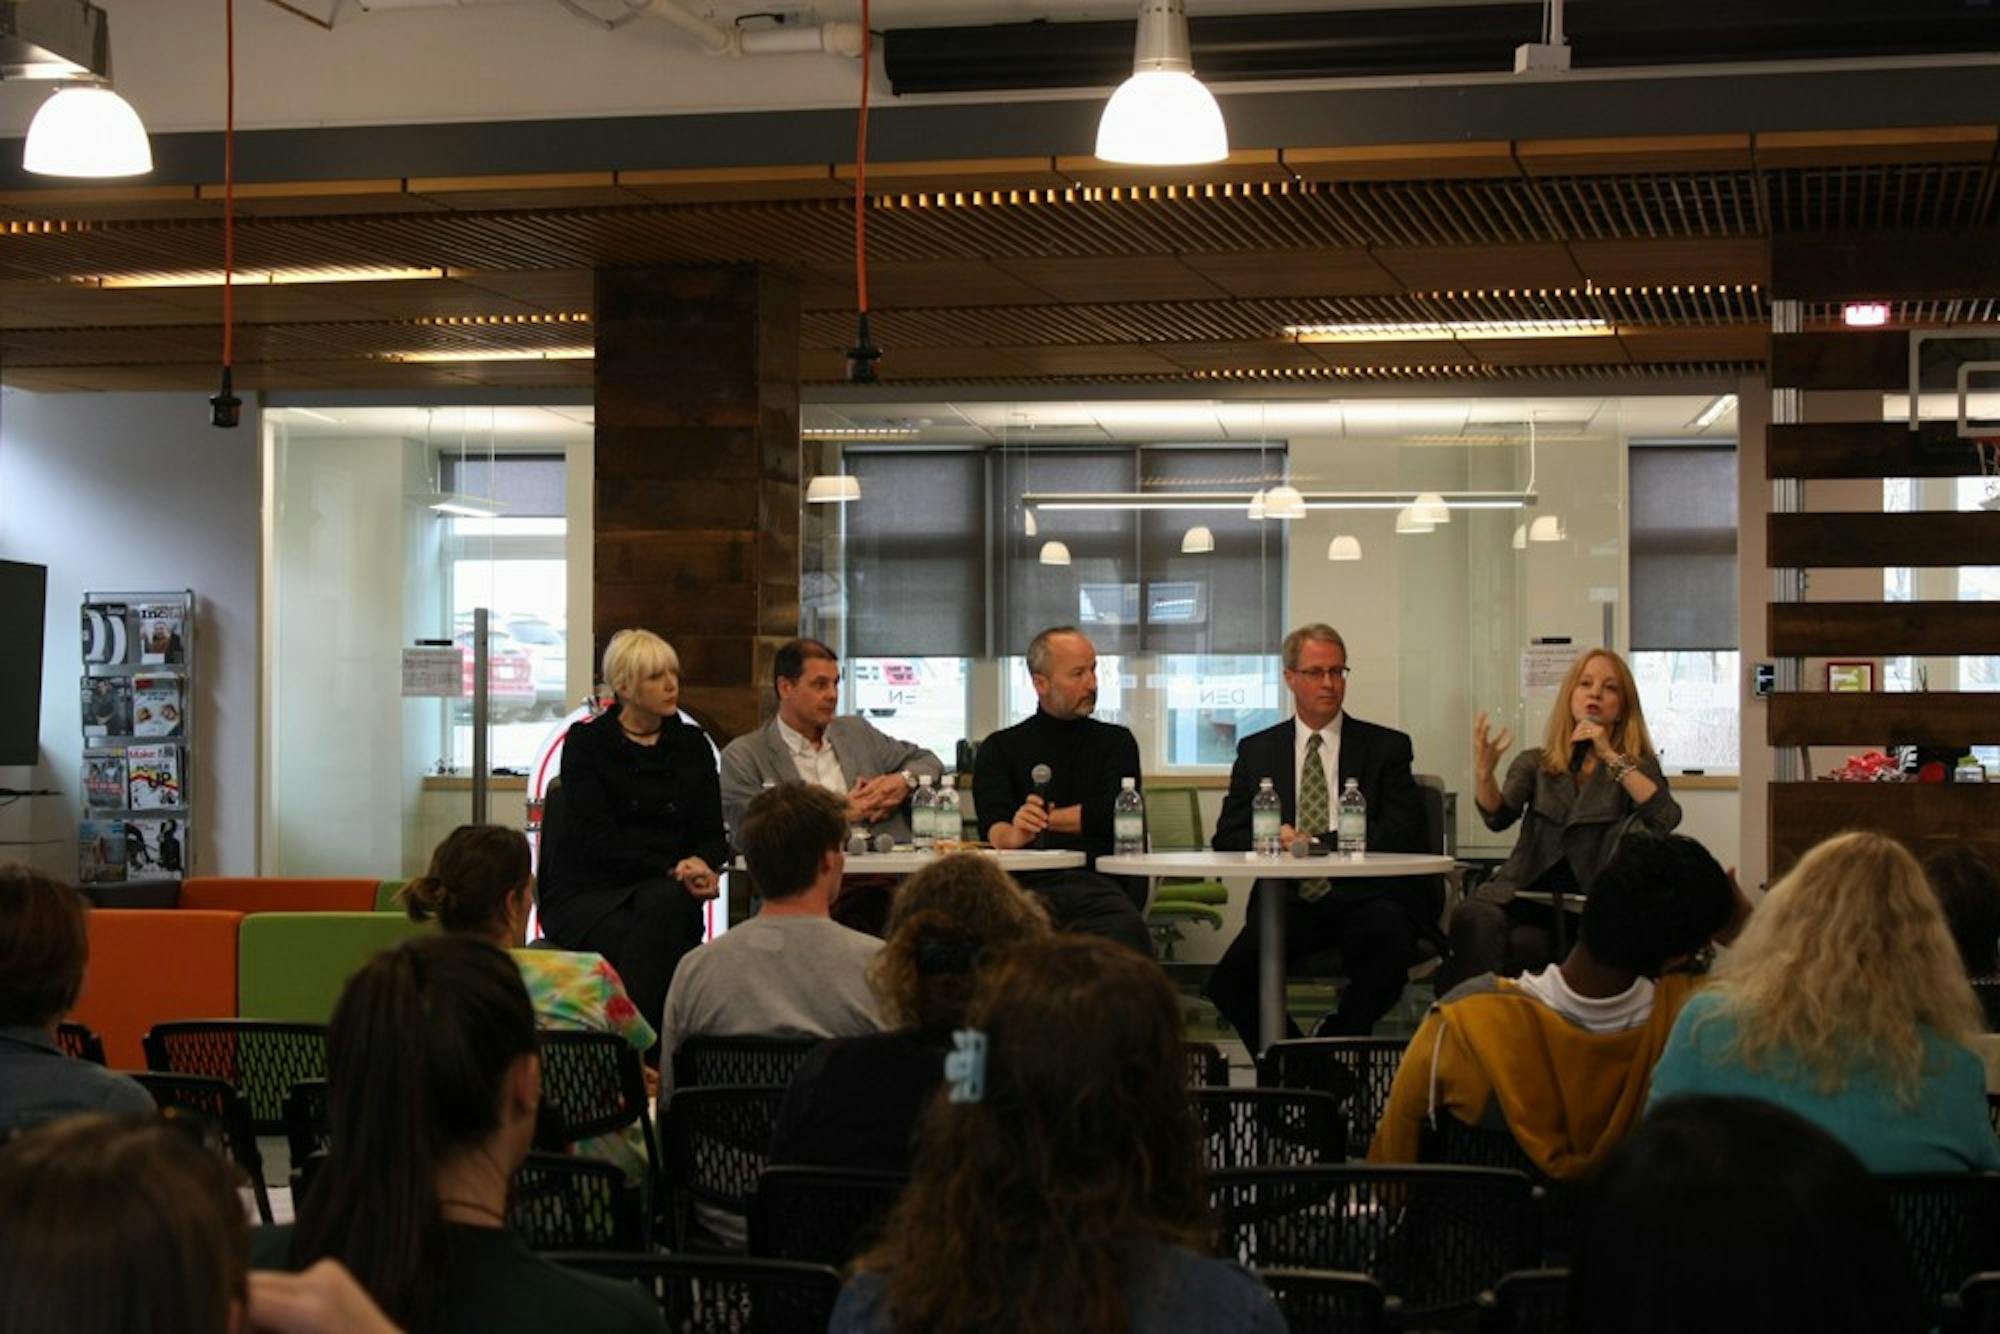 A panel of artists and entrepreneurs shared their perspectives on digital rights at the DEN Innovation Center on Monday.